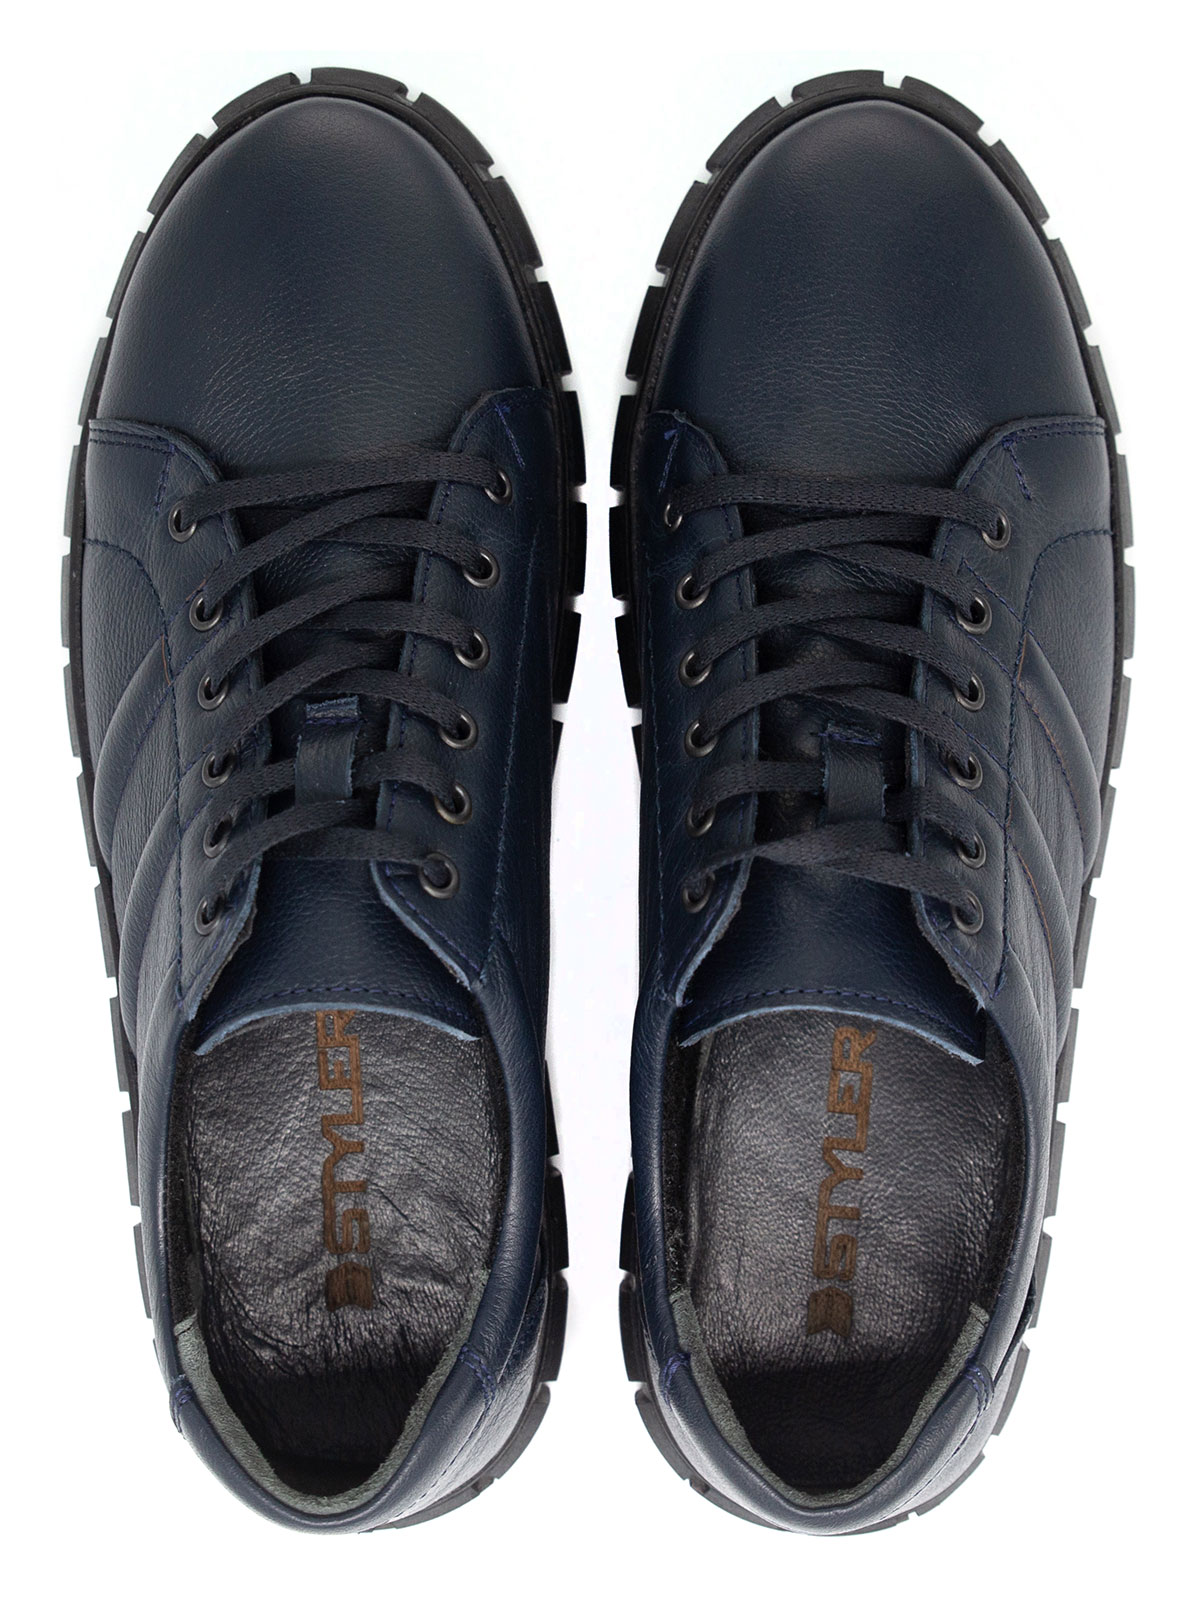 Dark blue sports leather shoes - 81098 - € 41.62 img2